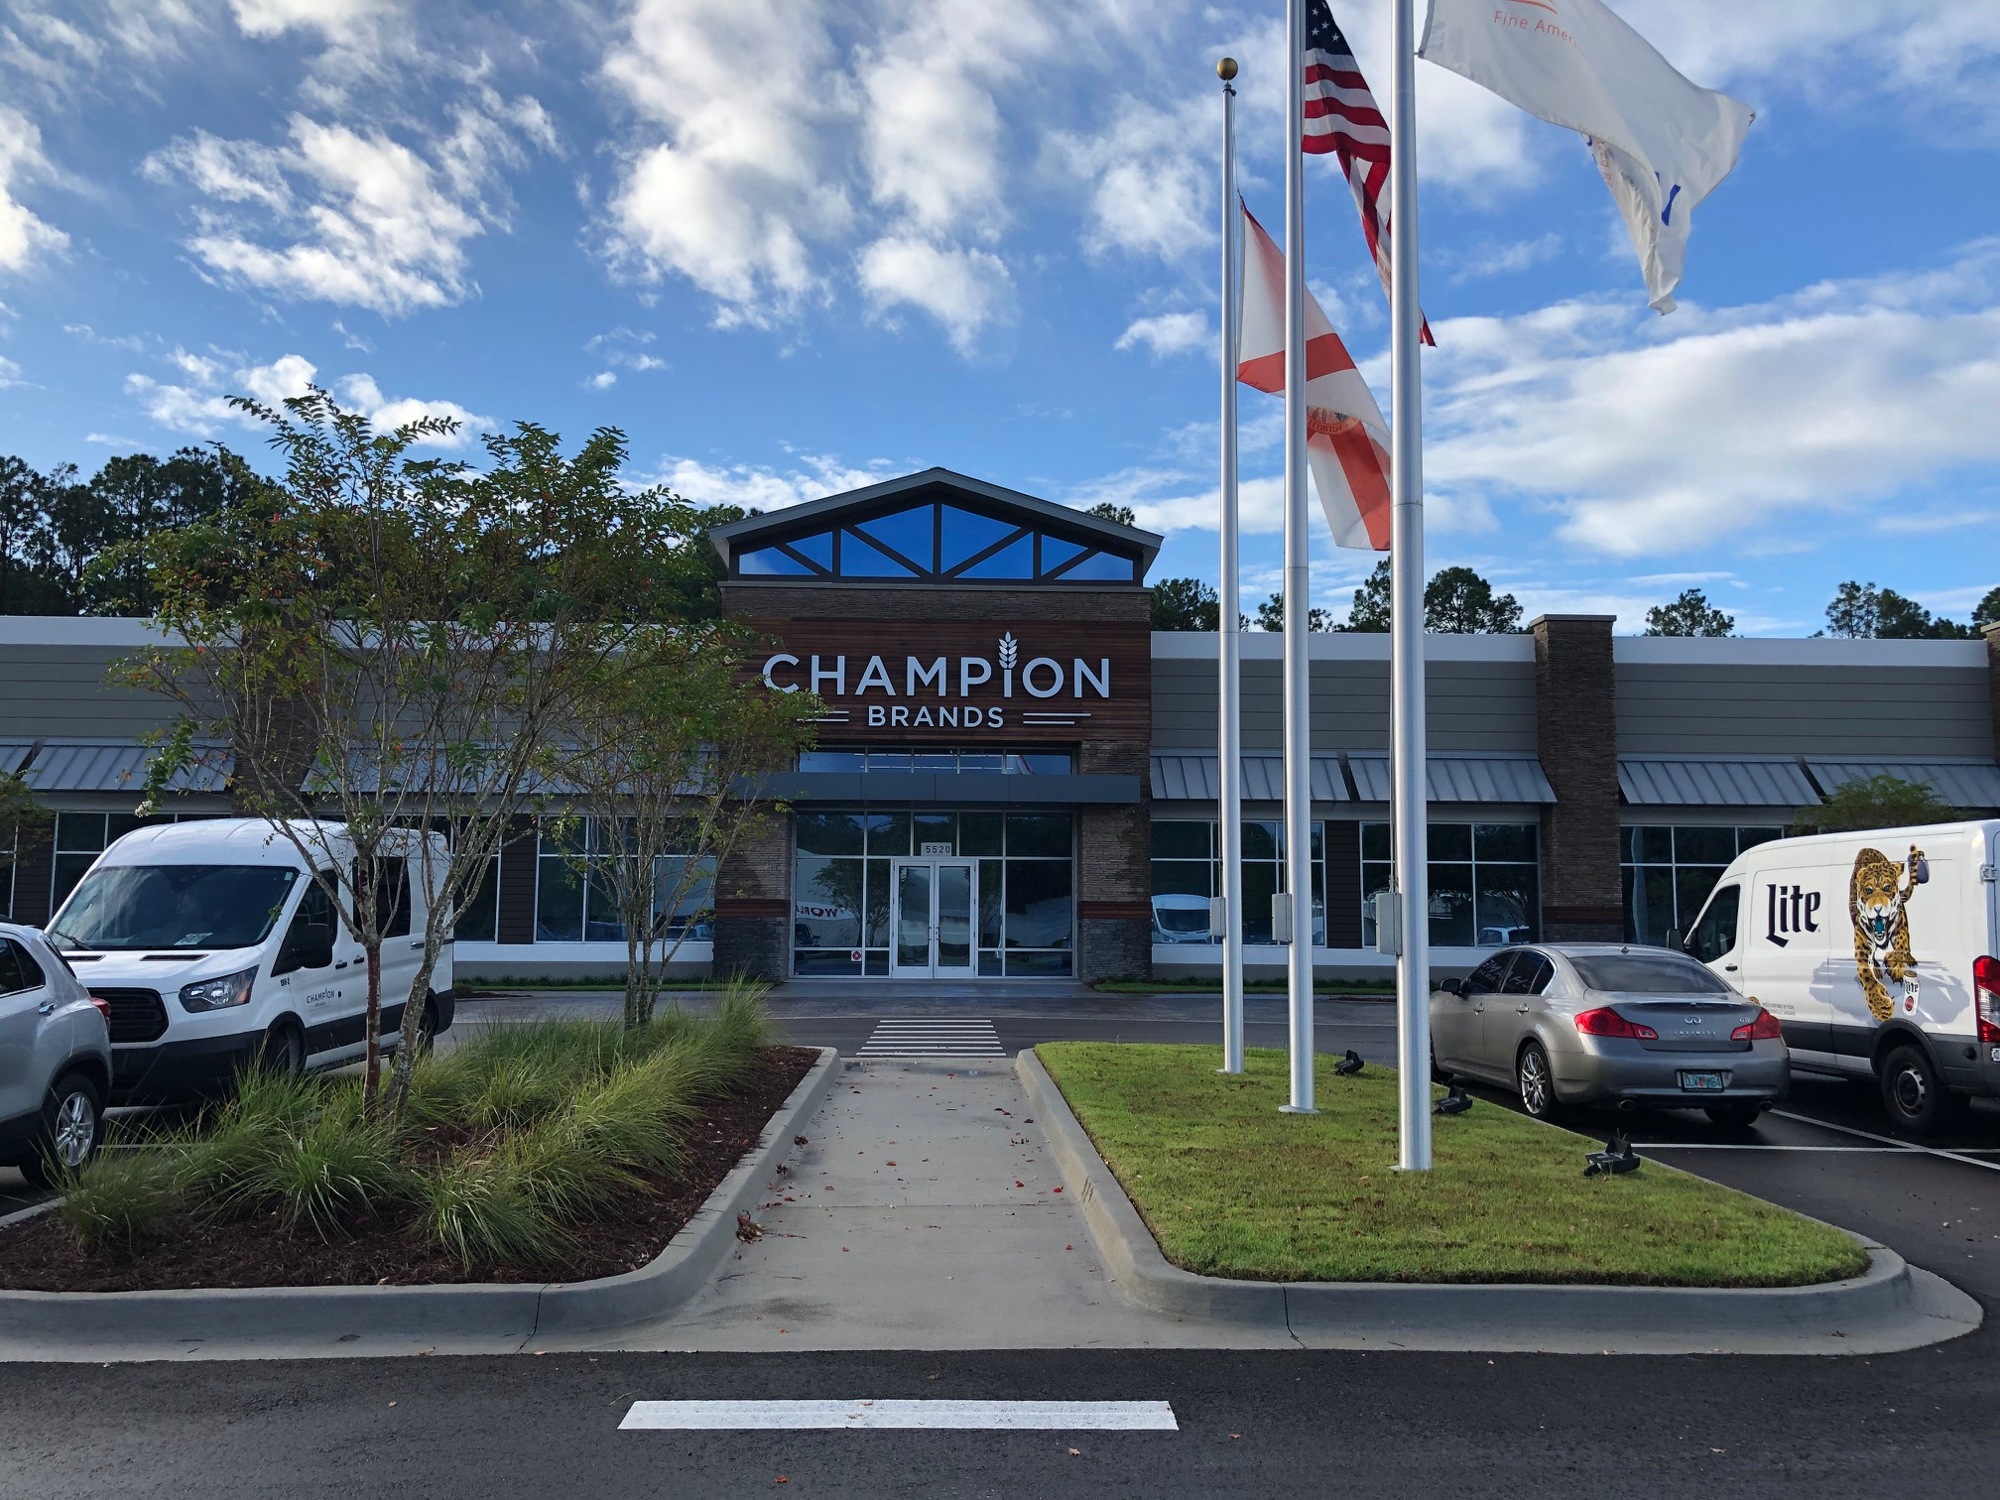 Champion Brands celebrated the grand opening of its new headquarters at 5520 Florida Mining Blvd. S. last week.